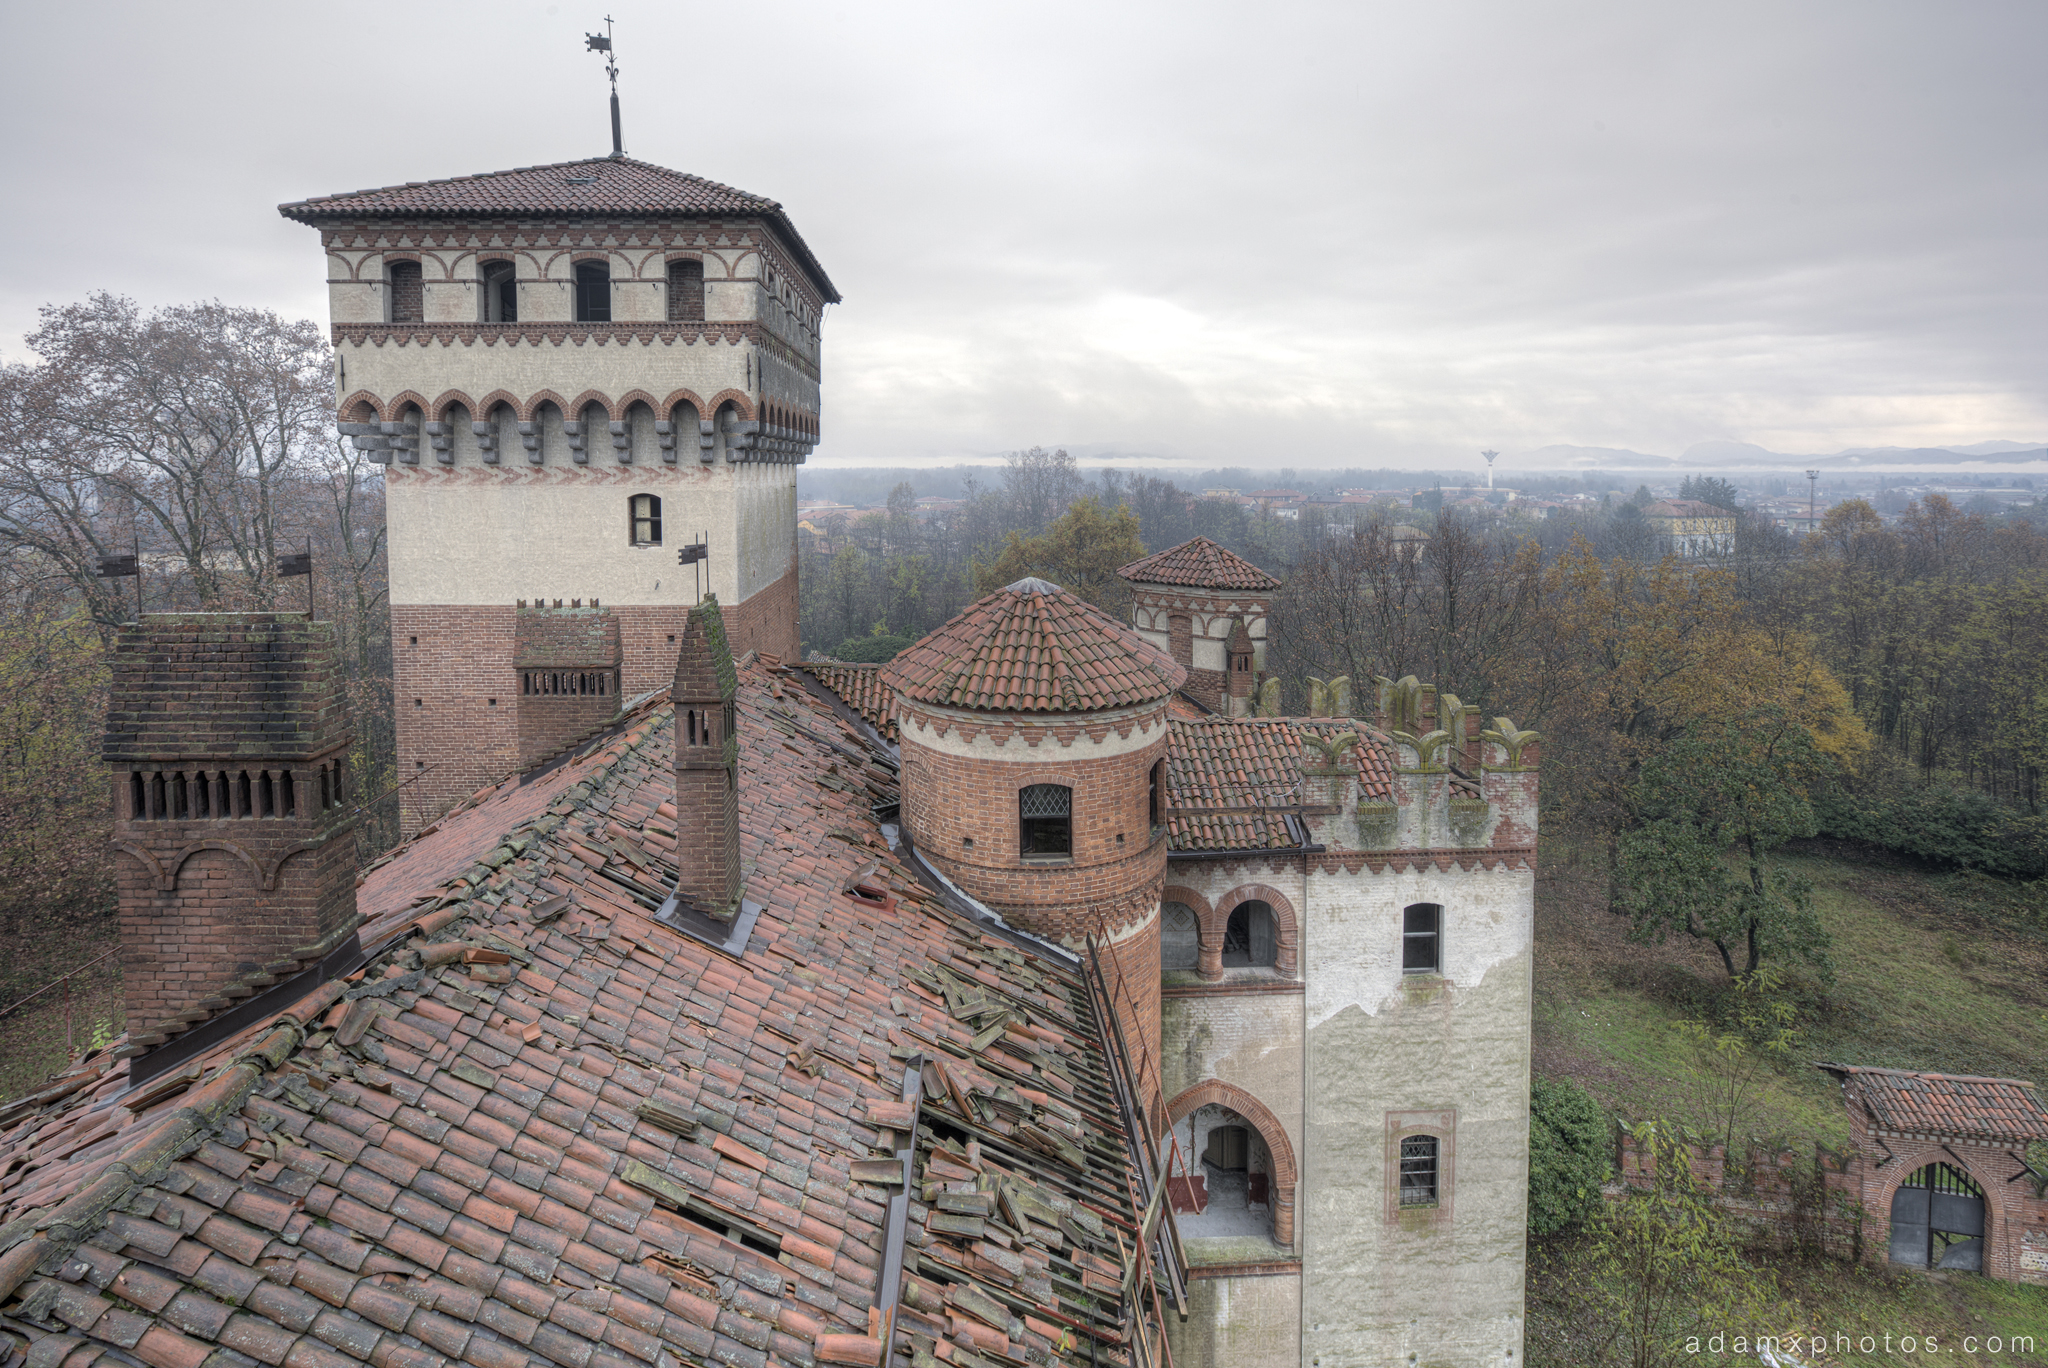 Castello di R Italy castle Urbex Adam X Urban Exploration rooftop roof turret tower landscape view top looking out photo photos report decay detail UE abandoned derelict unused empty disused decay decayed decaying grimy grime